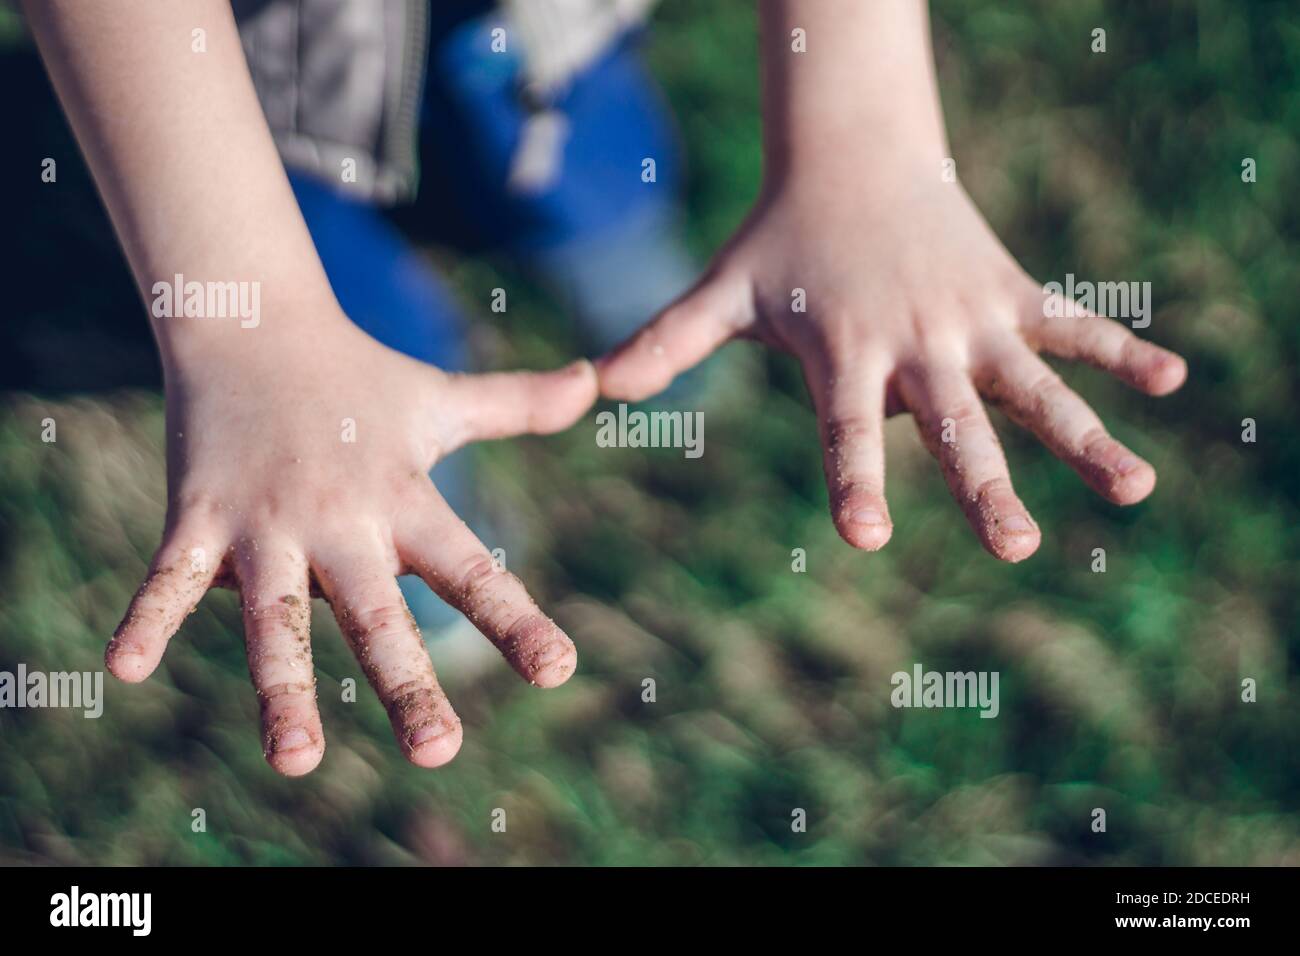 Small child's outstretched dirty hands on the green grass background in the park. Hygiene concept, close up. Stock Photo